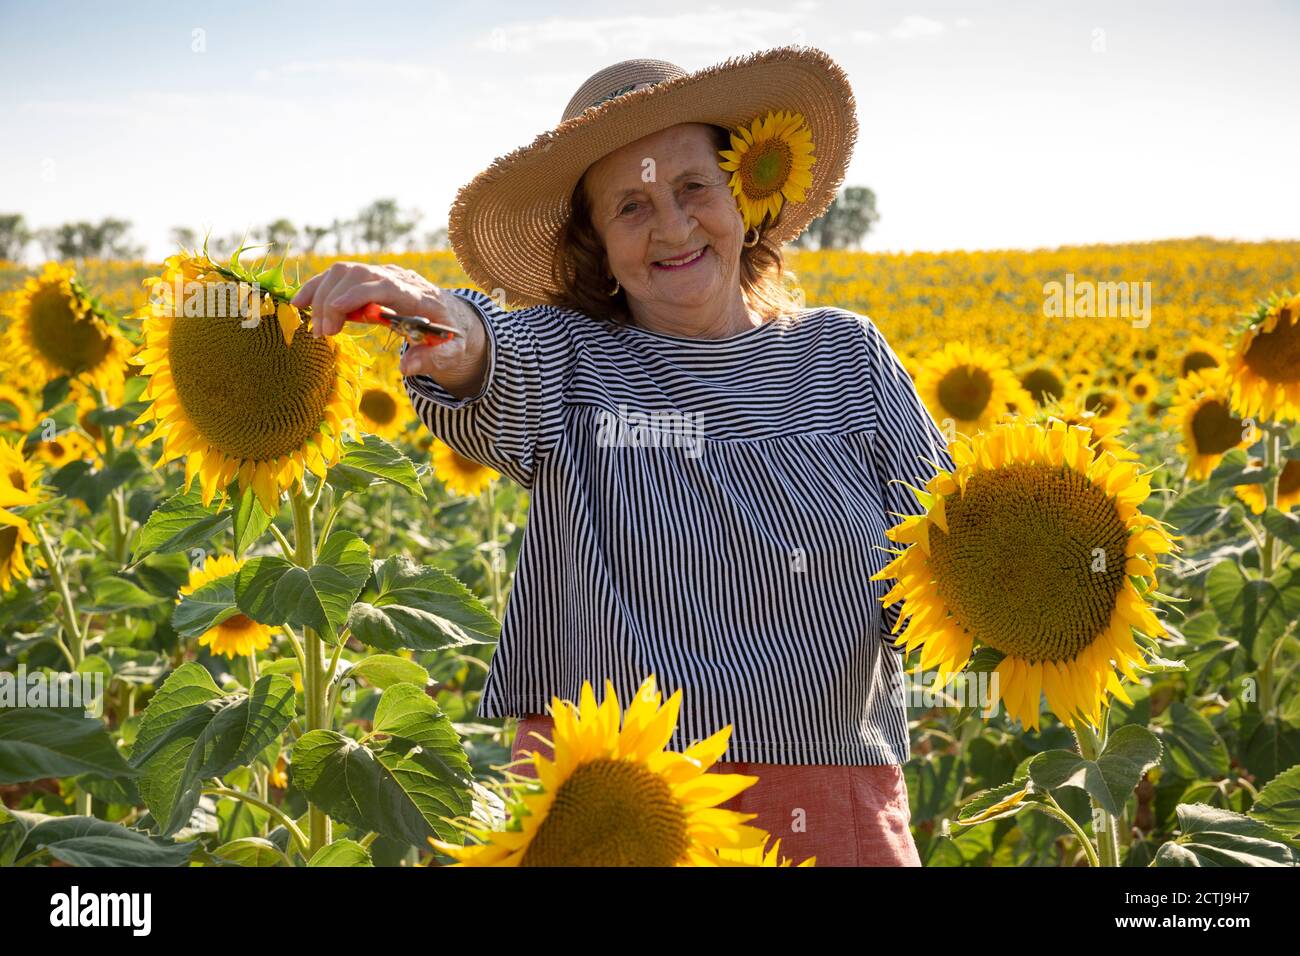 Portrait of a nice old woman with pruning shears in her hand in a field of sunflowers. Stock Photo